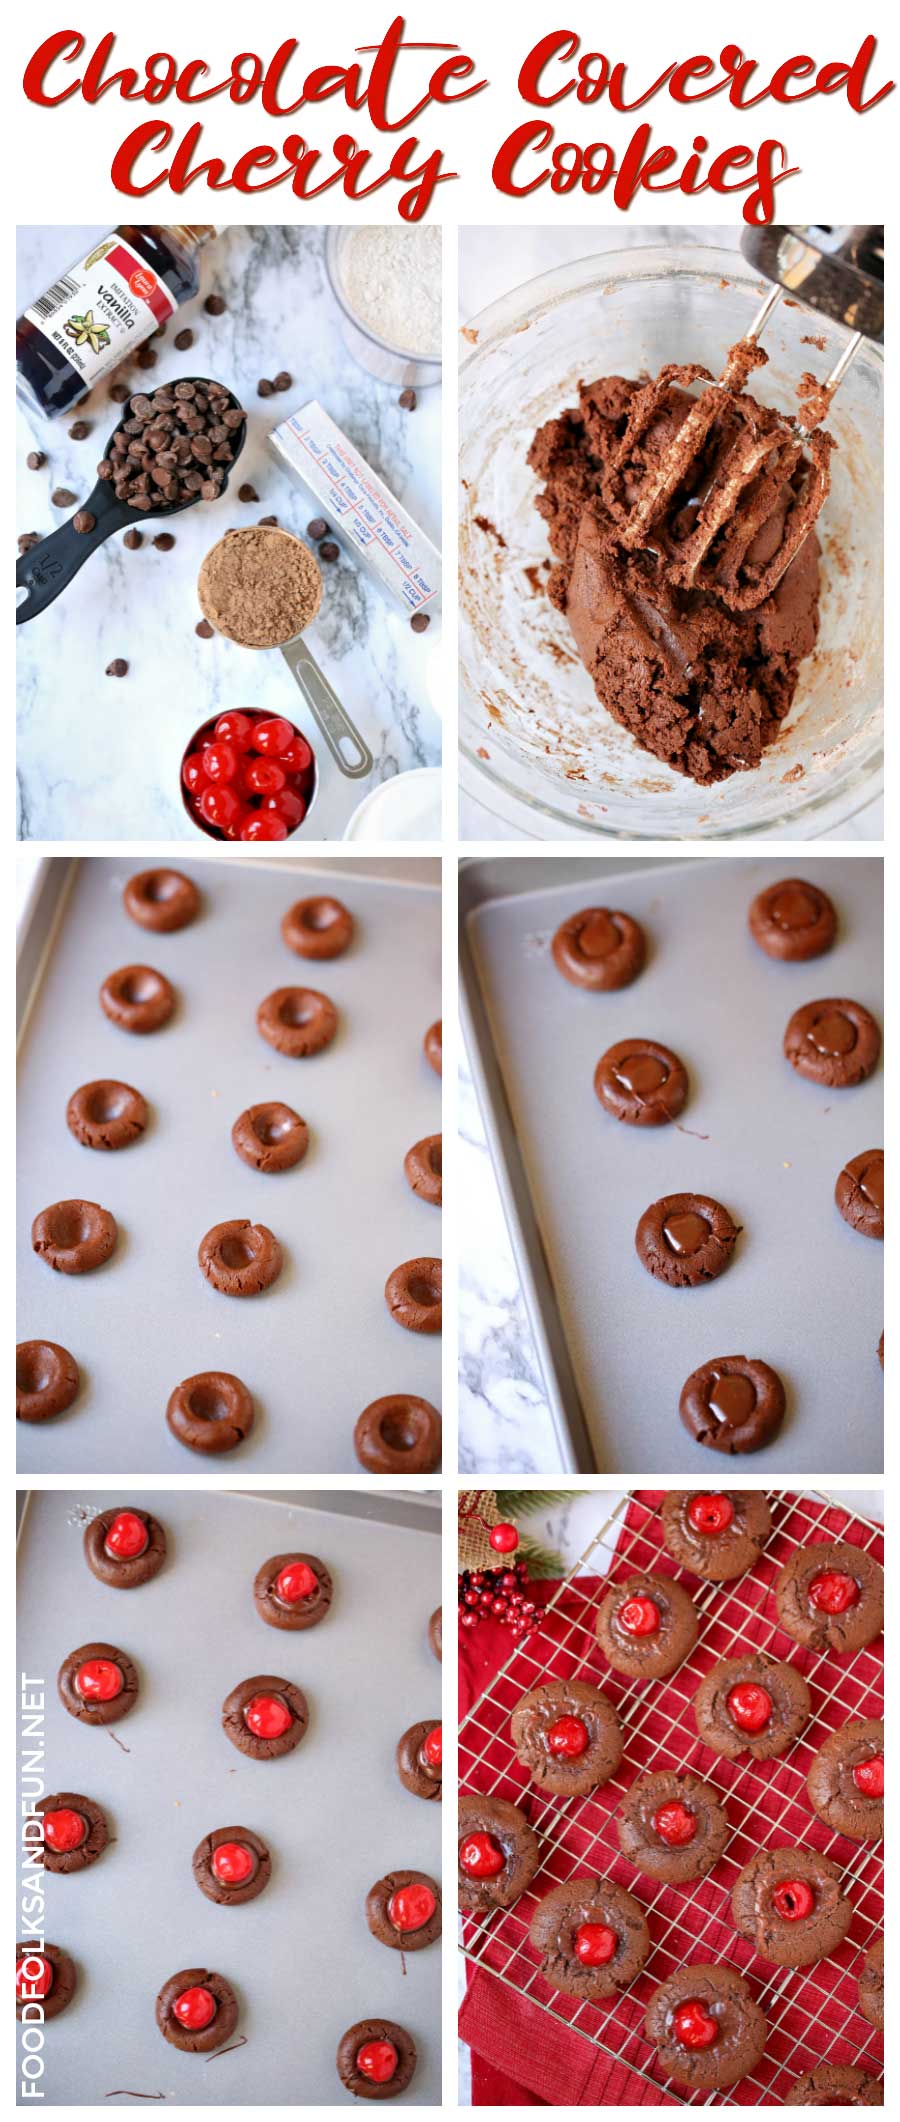 How to Make Chocolate Covered Cherry Cookies